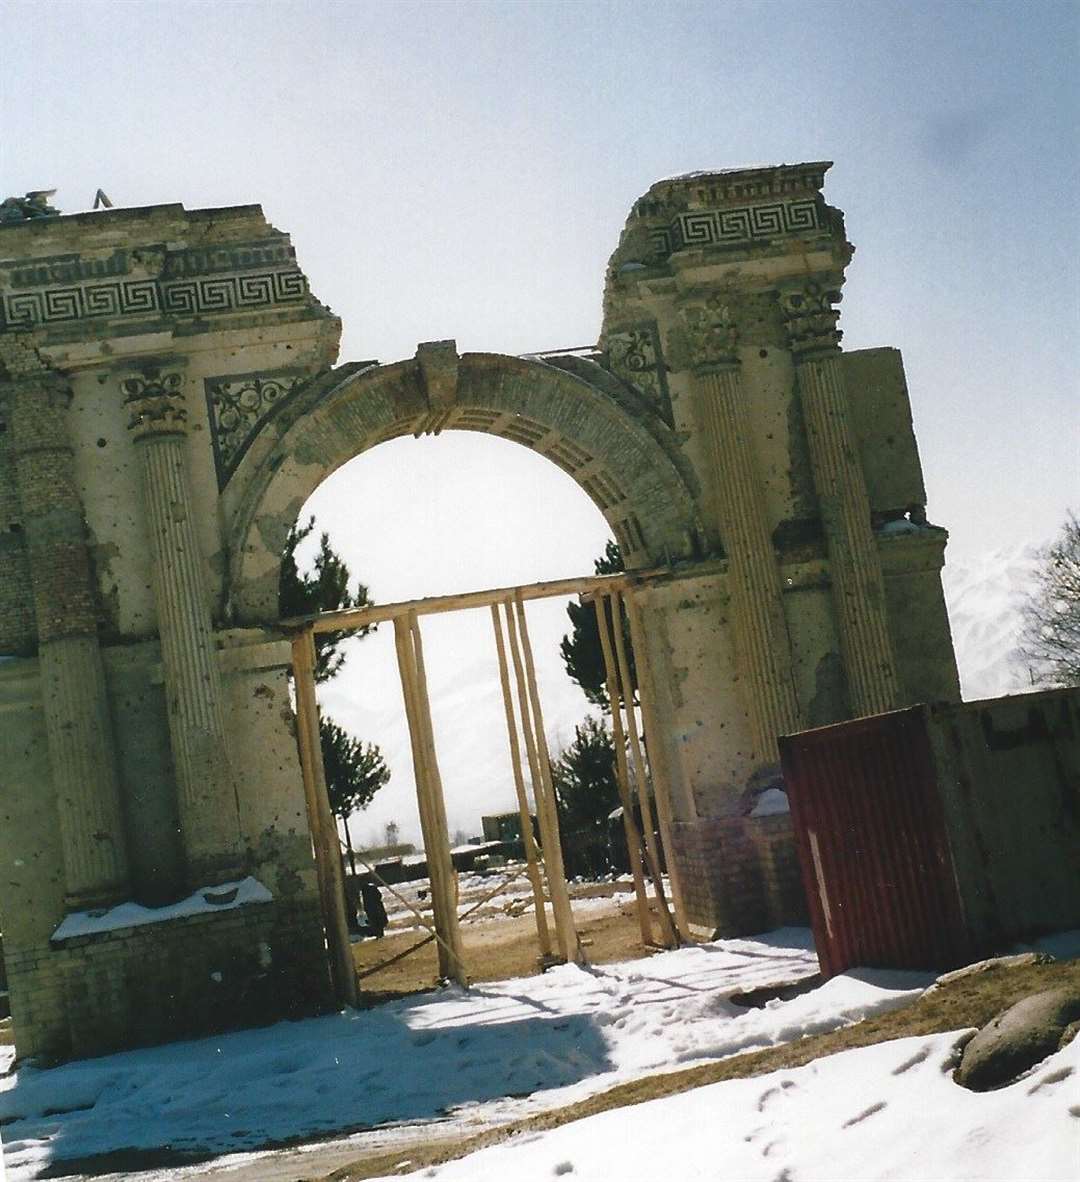 The damaged Paghman Arch